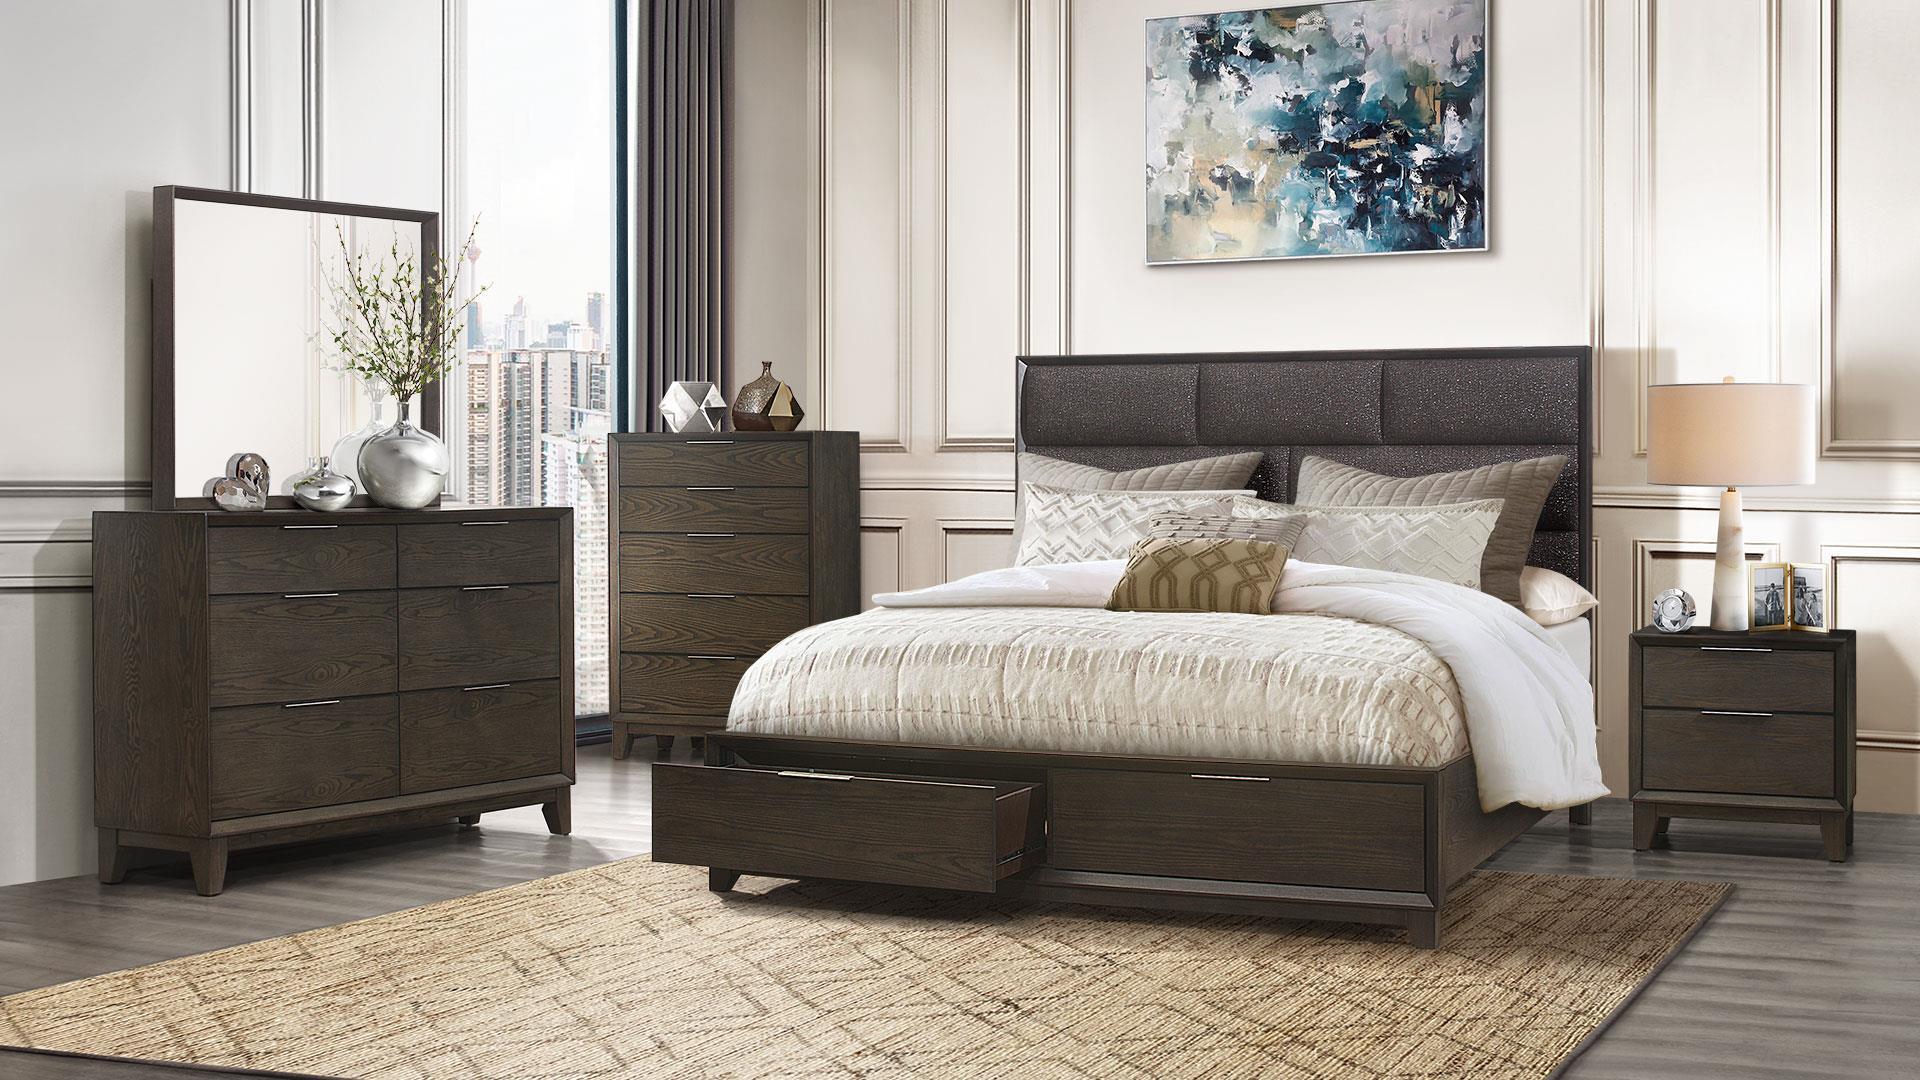 Contemporary Platform Bedroom Set WILLOW WILLOW-KB-Set-5 in Gray, Chocolate Fabric